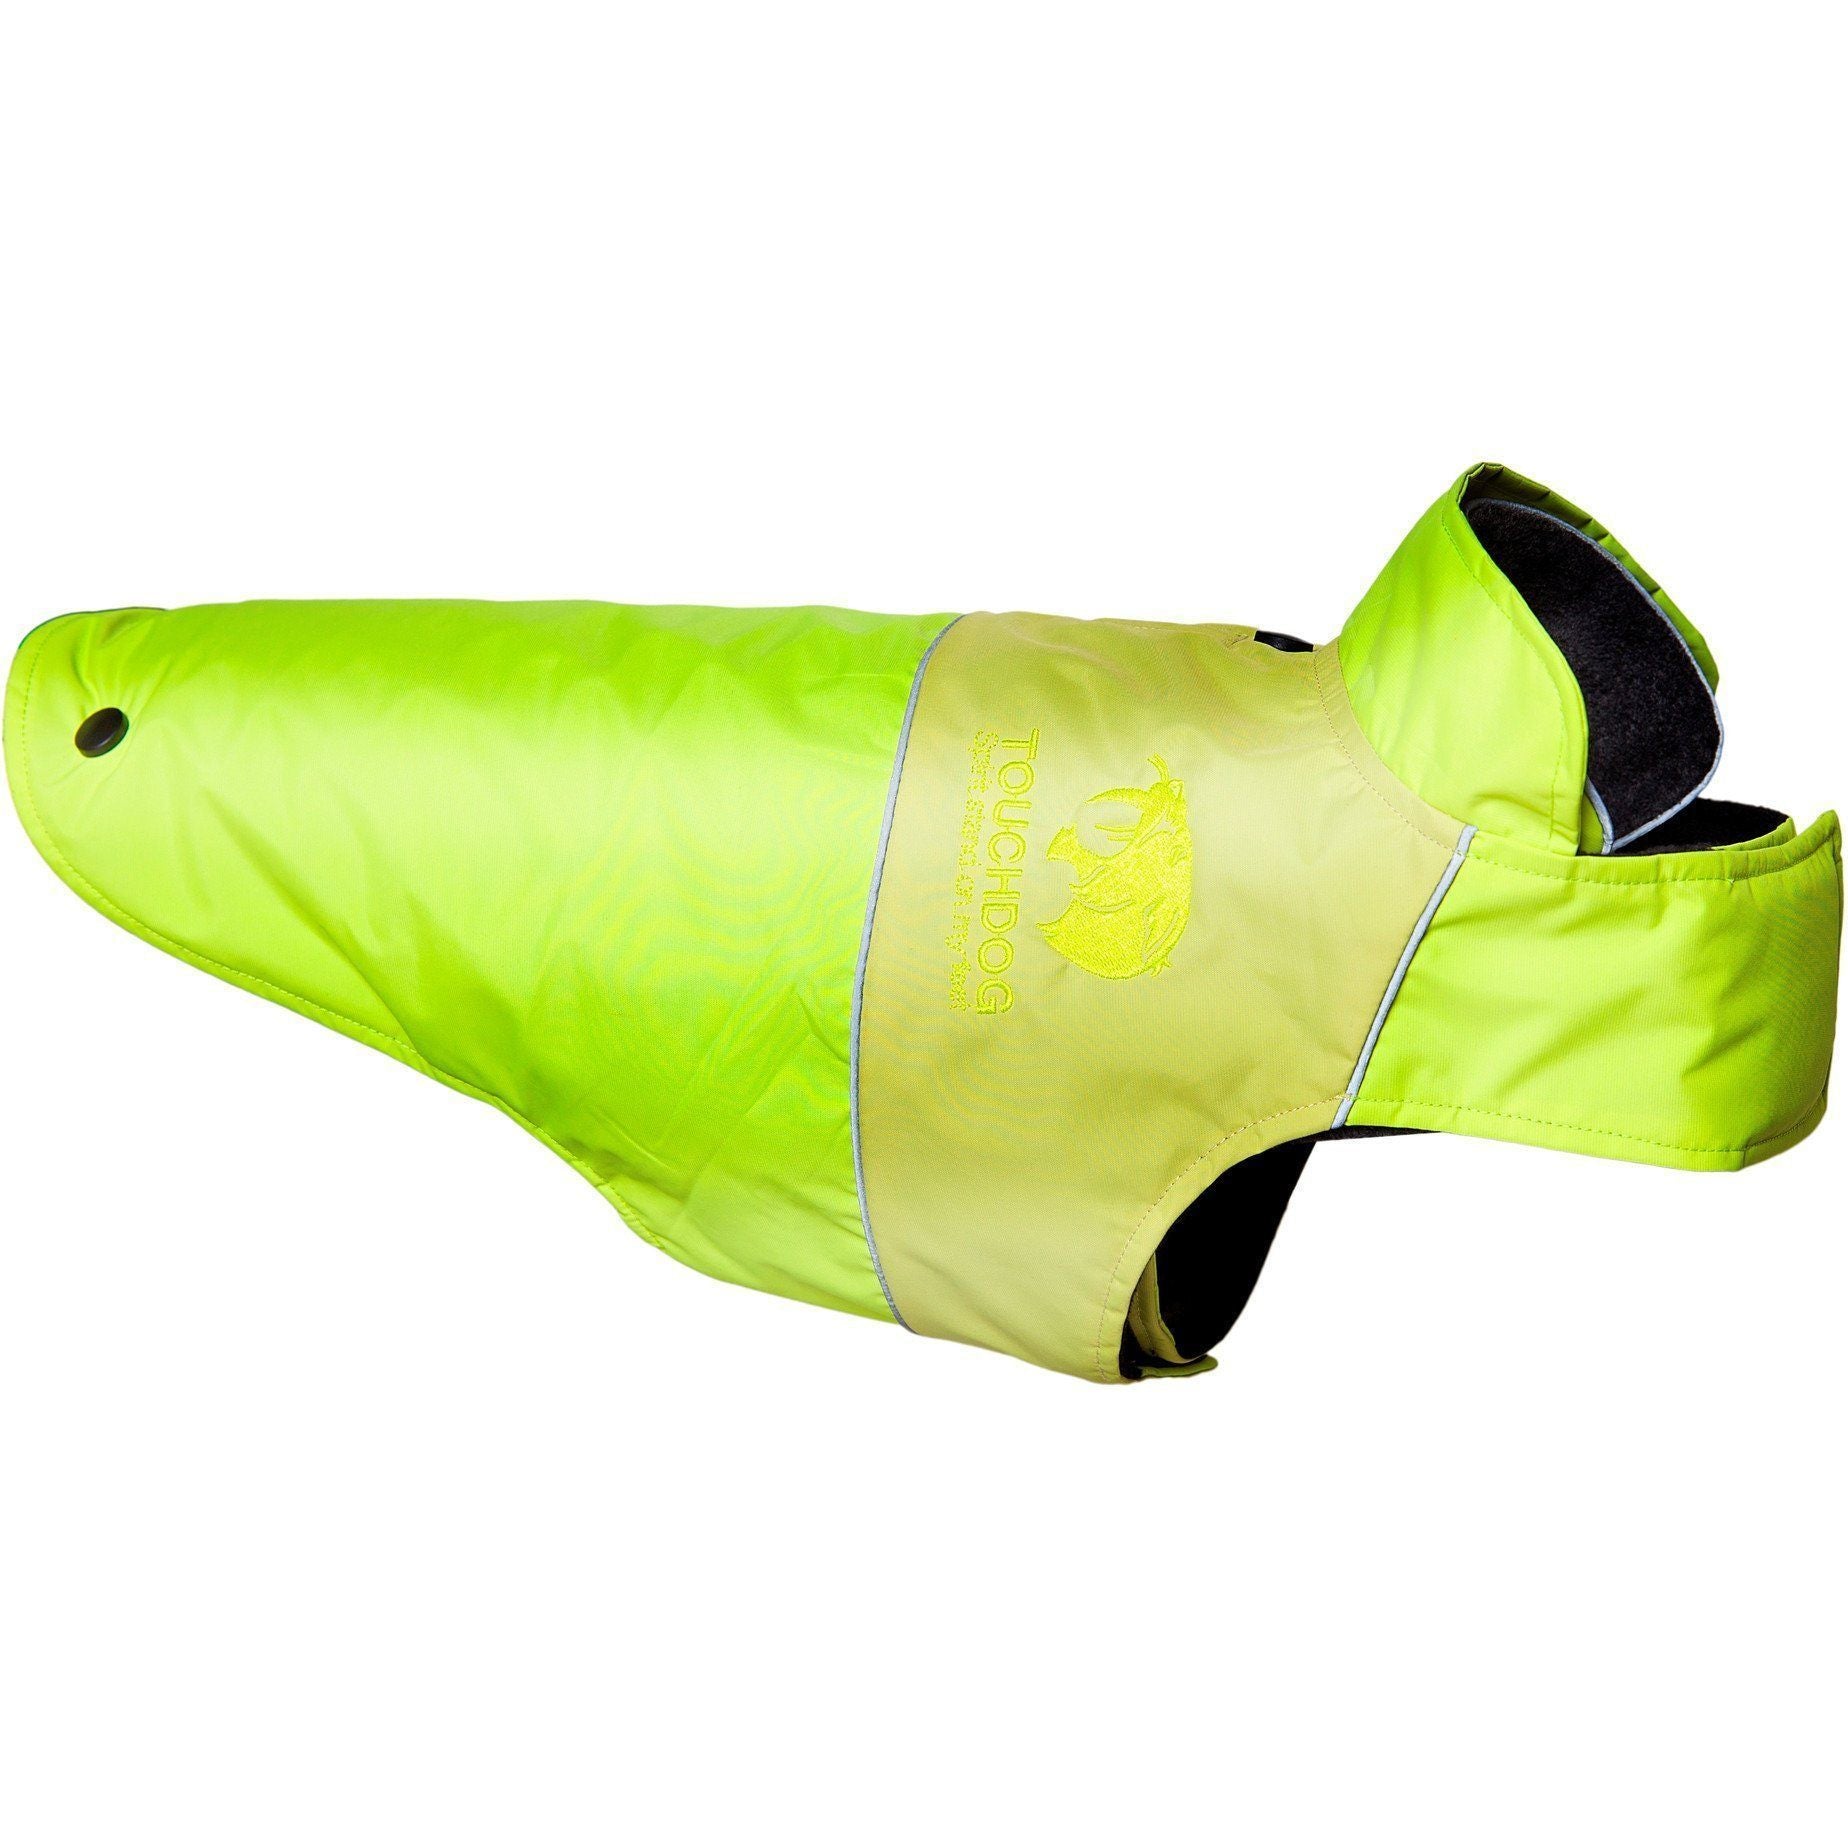 Touchdog ® Lightening-Shield 2-in-1 Dual-Removable-Layered Waterproof Dog Jacket X-Small Sun Yellow, Gold